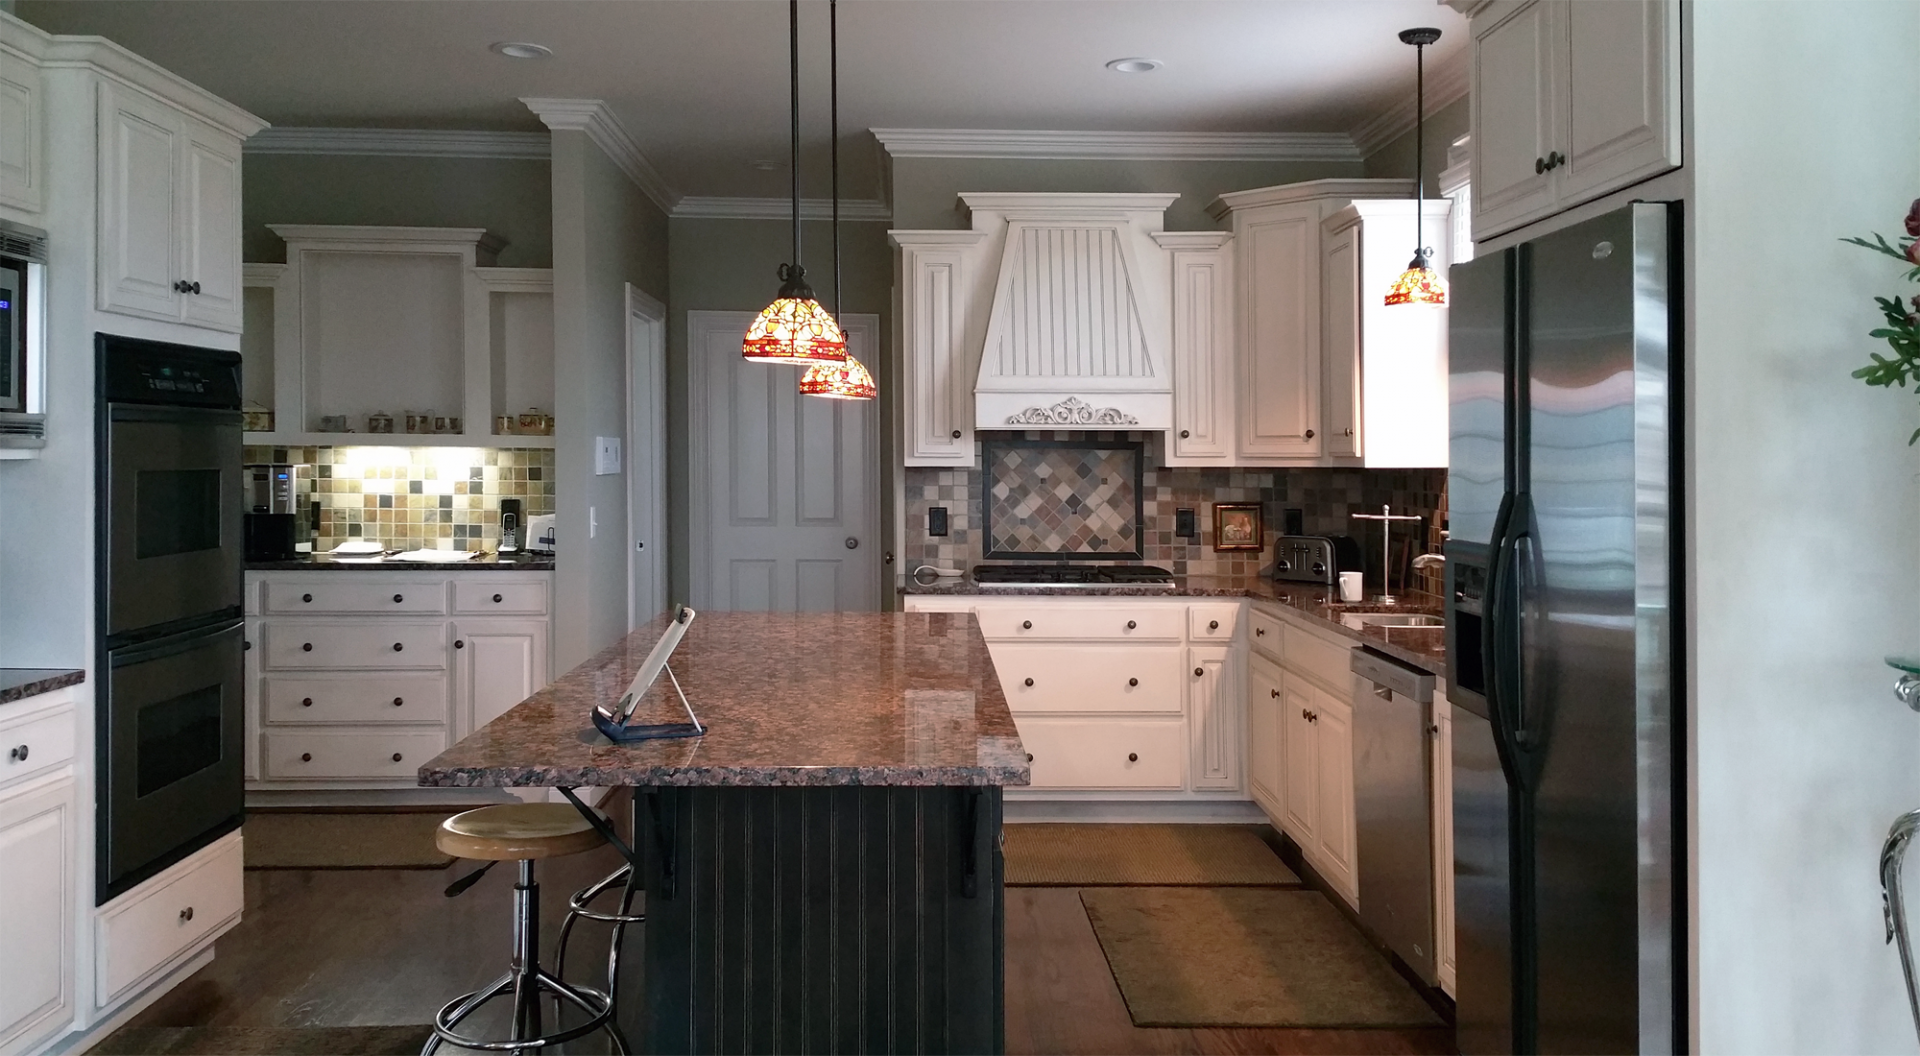 View this After Brentwood customer’s kitchen cabinet transformation adding a warm modern Tuscan glaze look.